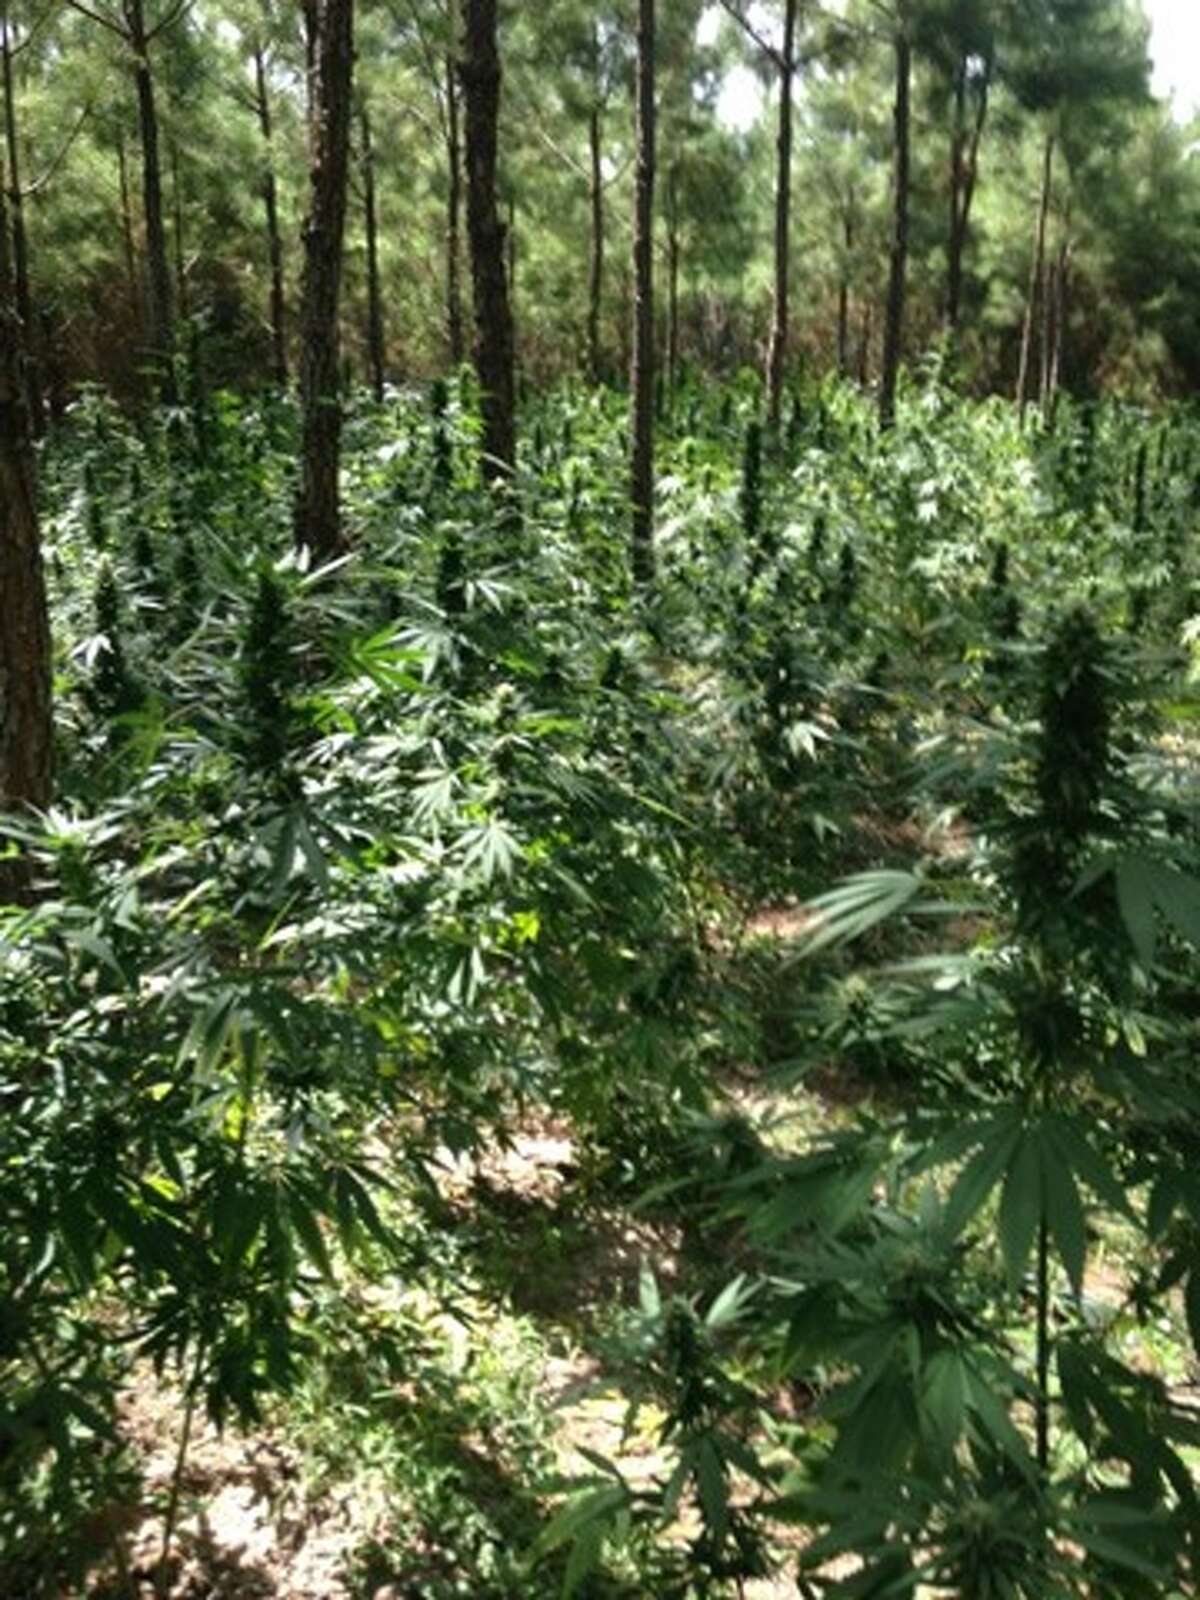 Sept. 2, 2014: – Polk County authorities uncovered another massive marijuana farm in their jurisdiction, this one containing roughly 9,600 plants, according to the Montgomery County Police Reporter. RELATED: Another massive marijuana find in Polk County